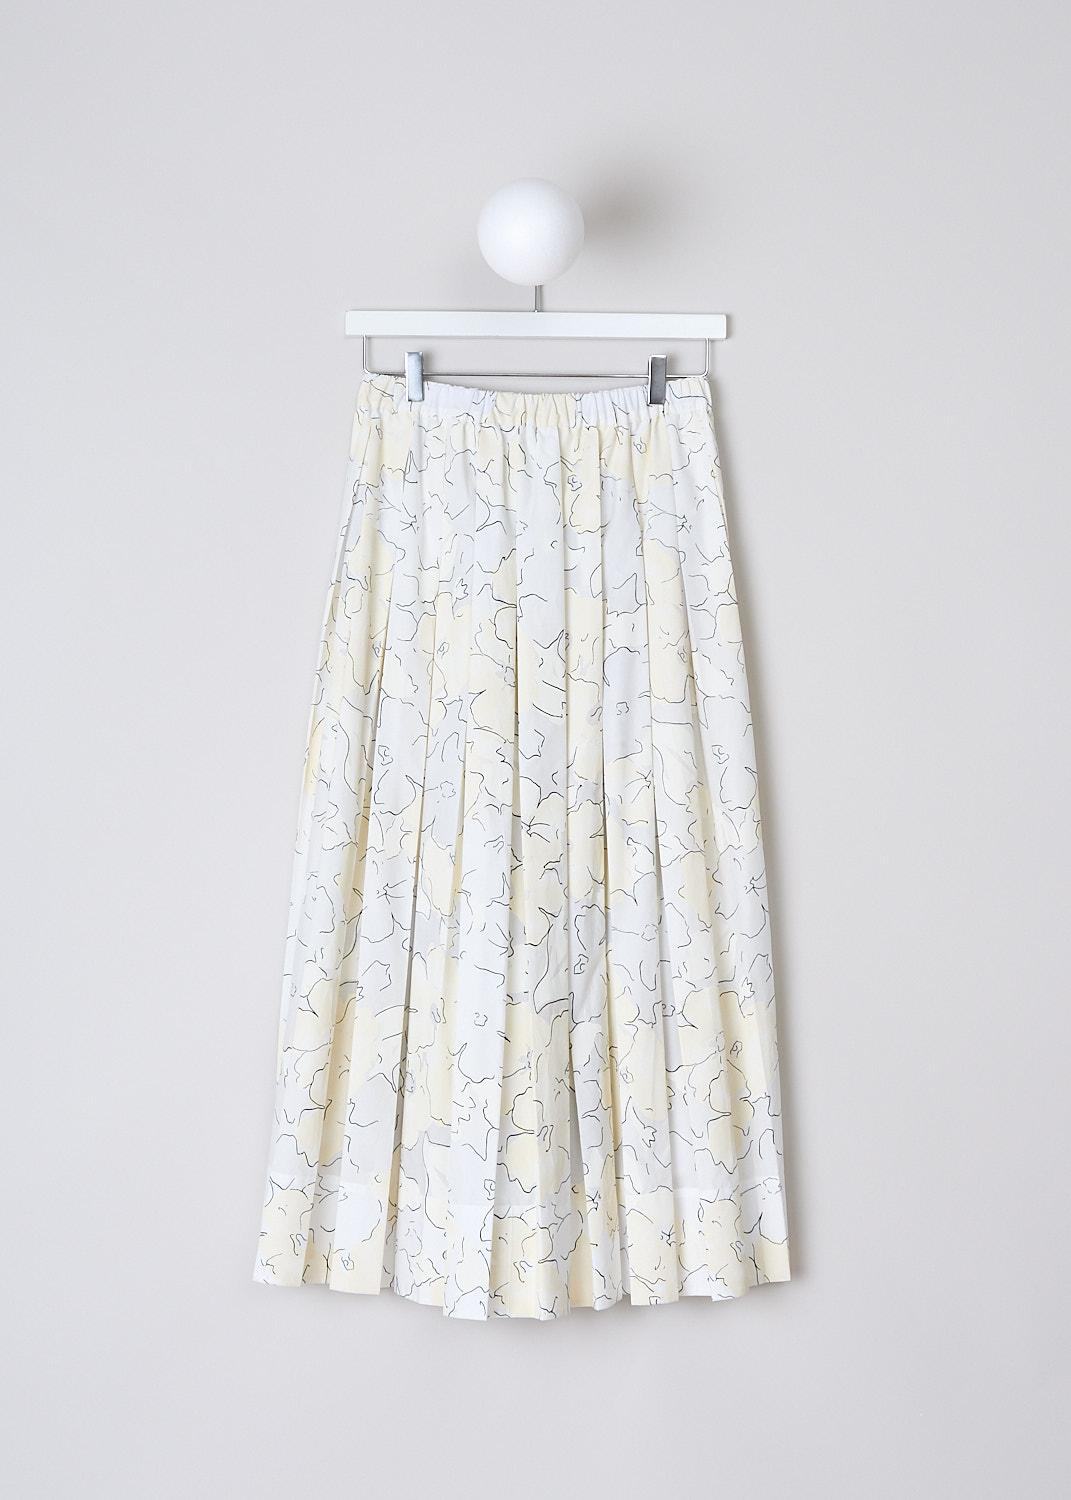 PLAN C, PLEATED FIELD OF FRANGIPANI SKIRT IN BUTTER TONES, GOCAD30HE0_TP091_FIY05, Beige, Print, Yellow, Back, This multi-fabric Field Of Frangipani pleated midi skirt has a small floral print in the front and a big floral print in the back. Both prints are in butter tones. The skirt has a broad elasticated waistband. Slanted side pockets are concealed in the side seams. The skirt has an asymmetric hemline, meaning the back is longer than the front. 

